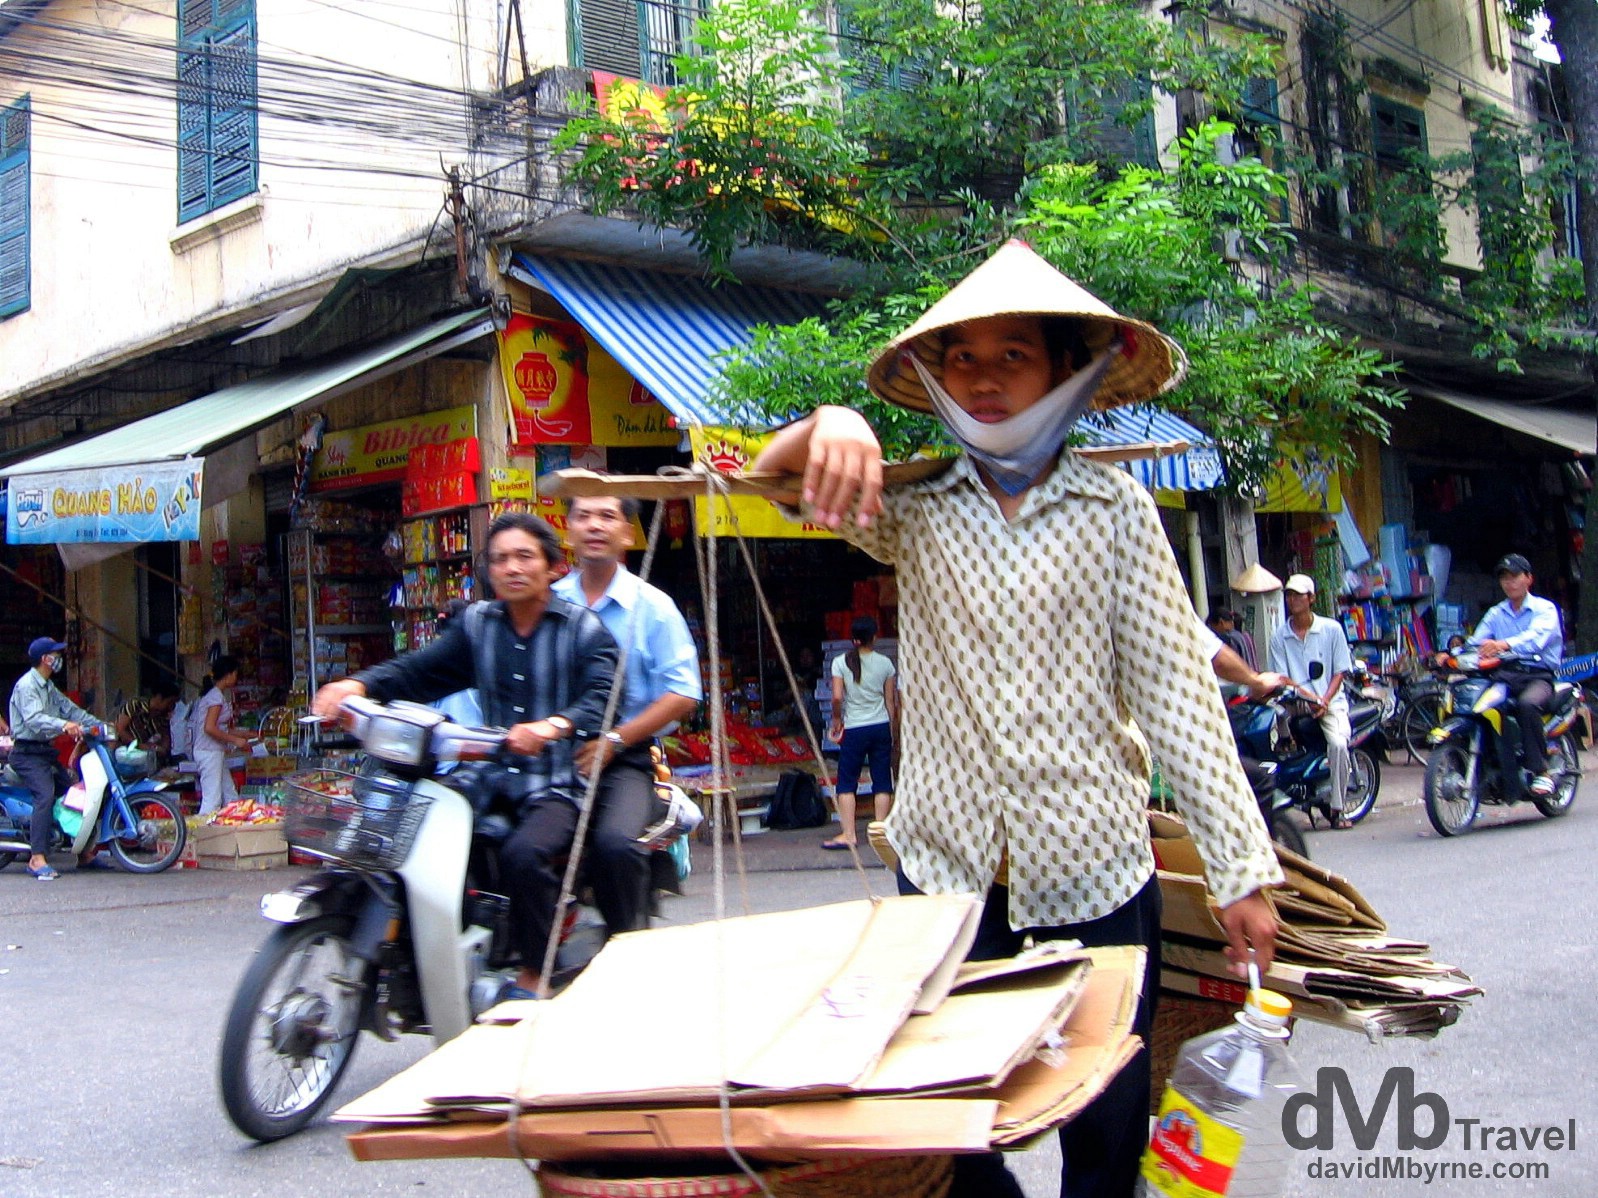 Activity on the streets of the Old Quarter of Hanoi, northern Vietnam. September 5th 2005. 